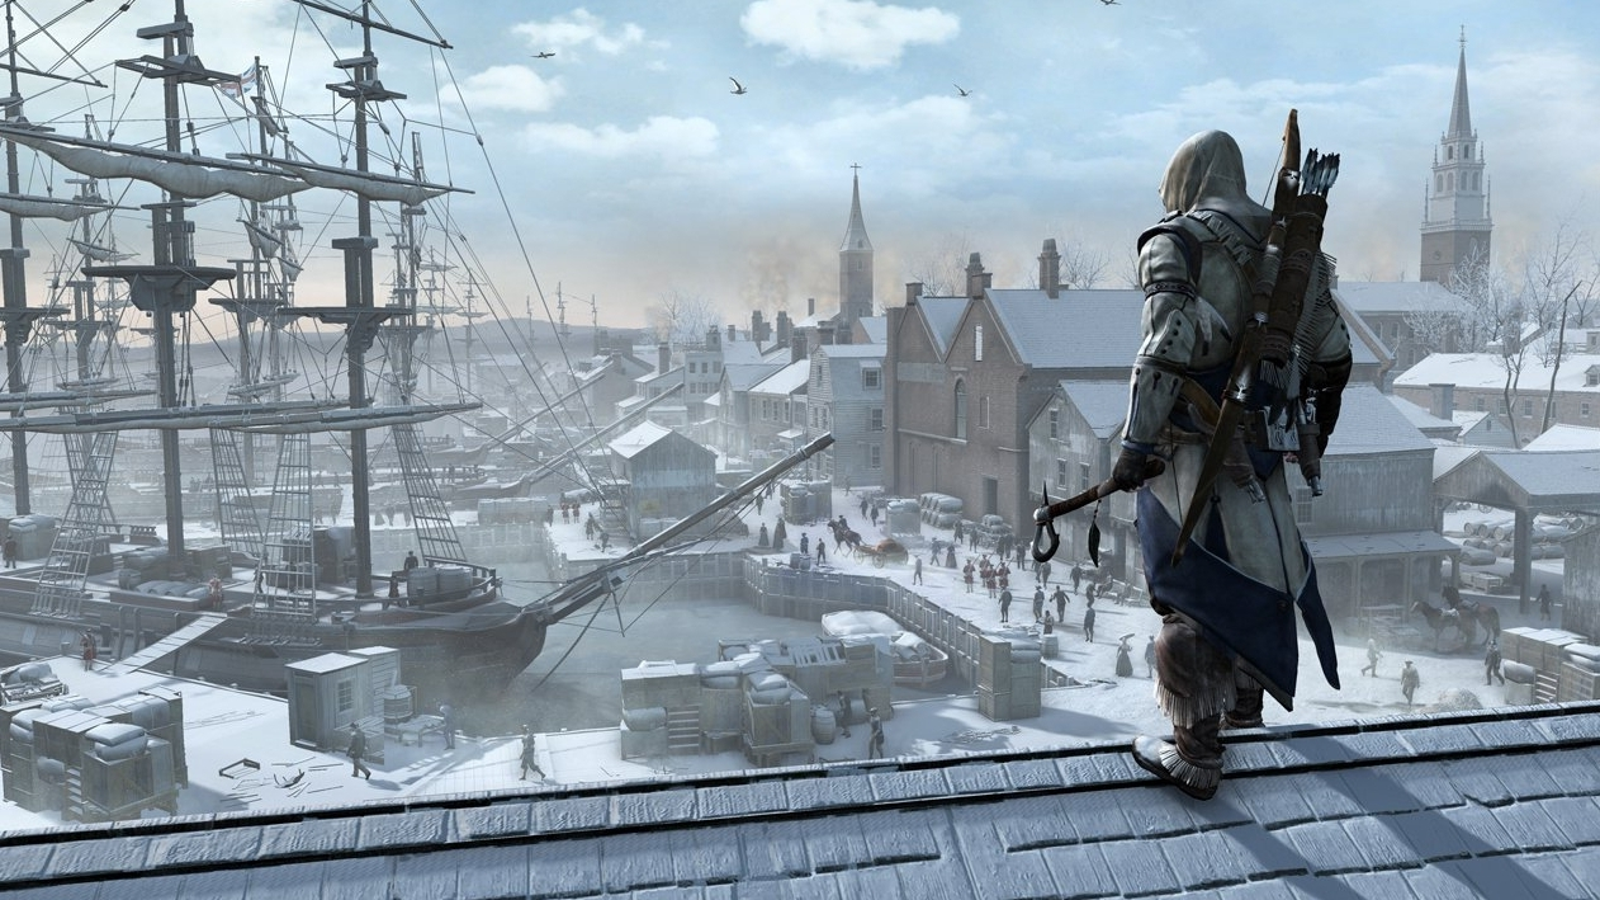 Save 75% on Assassin's Creed® III Remastered on Steam